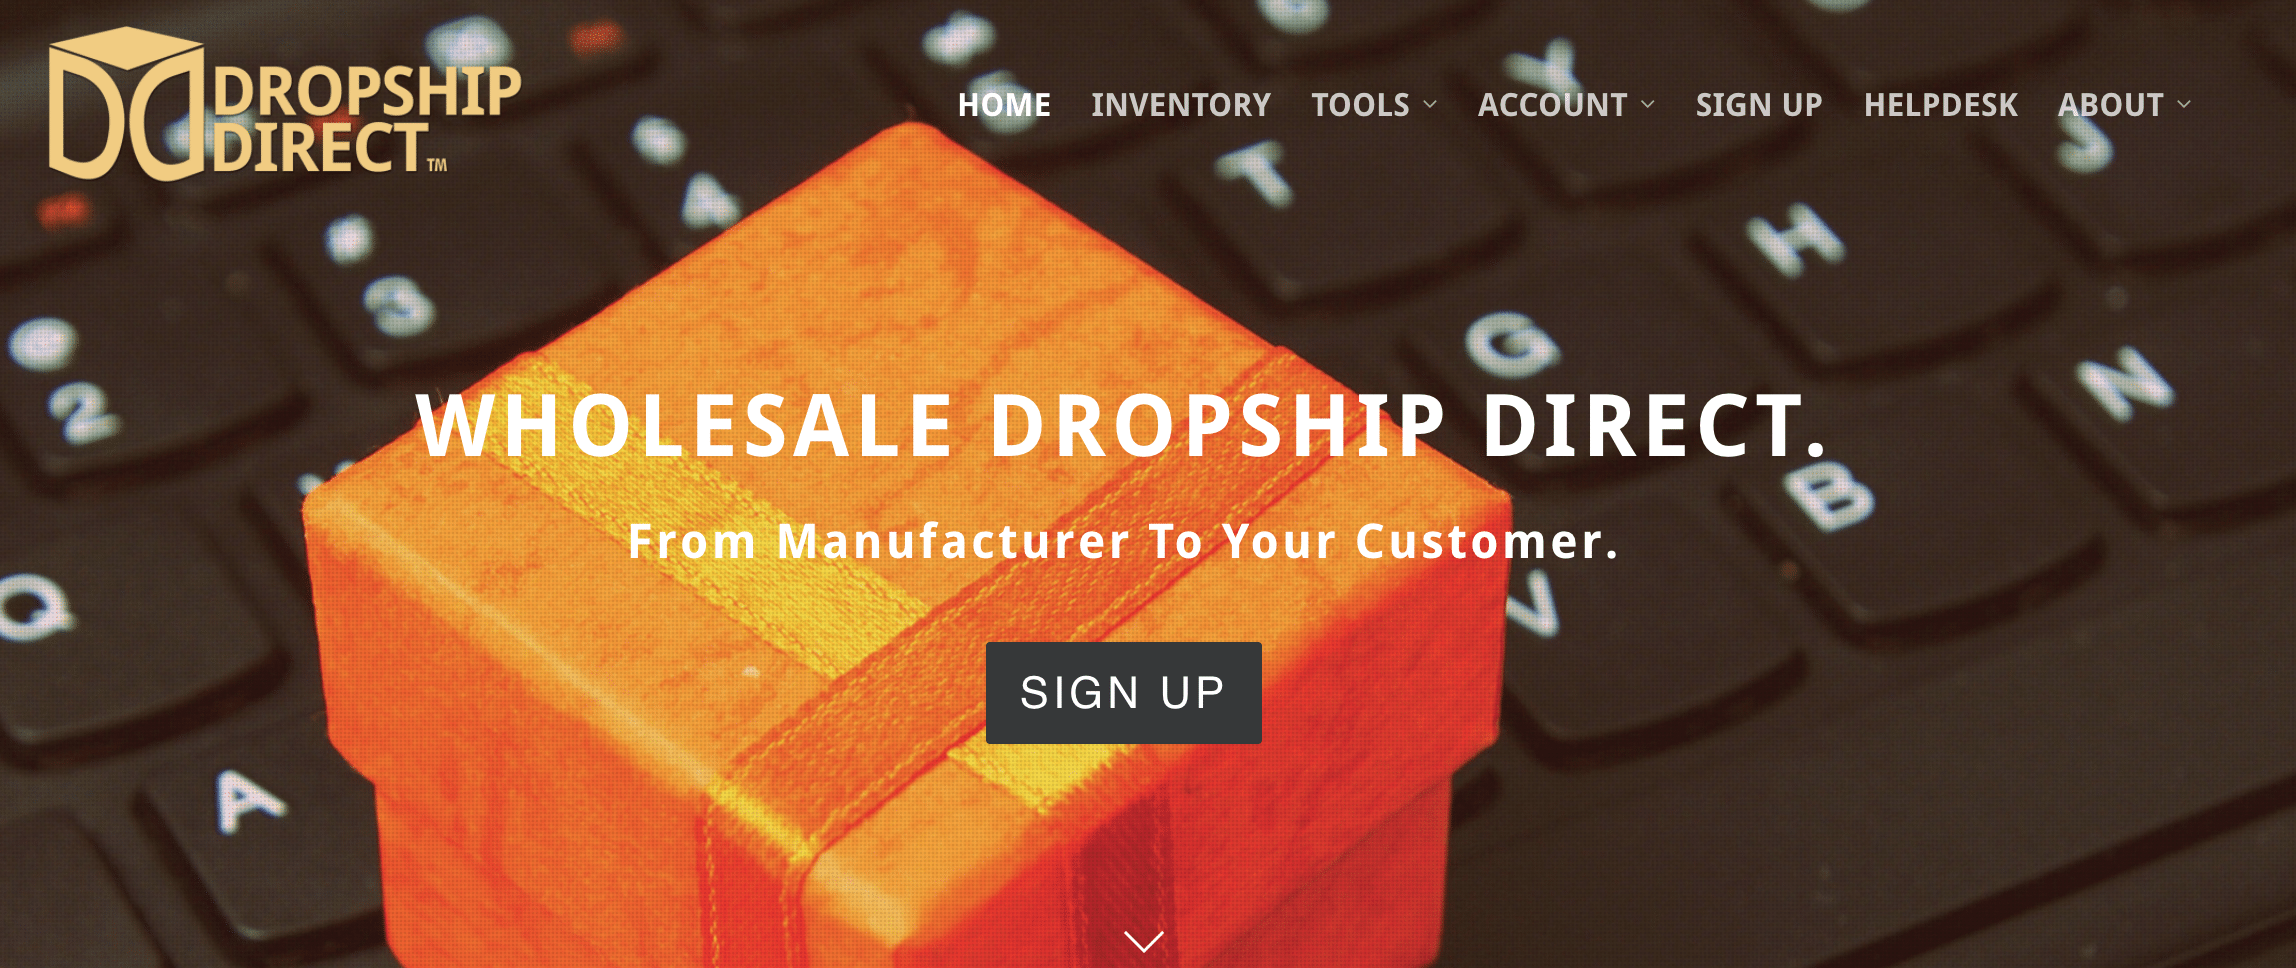 7 Best Drop Shipping Companies for Your eCommerce Business